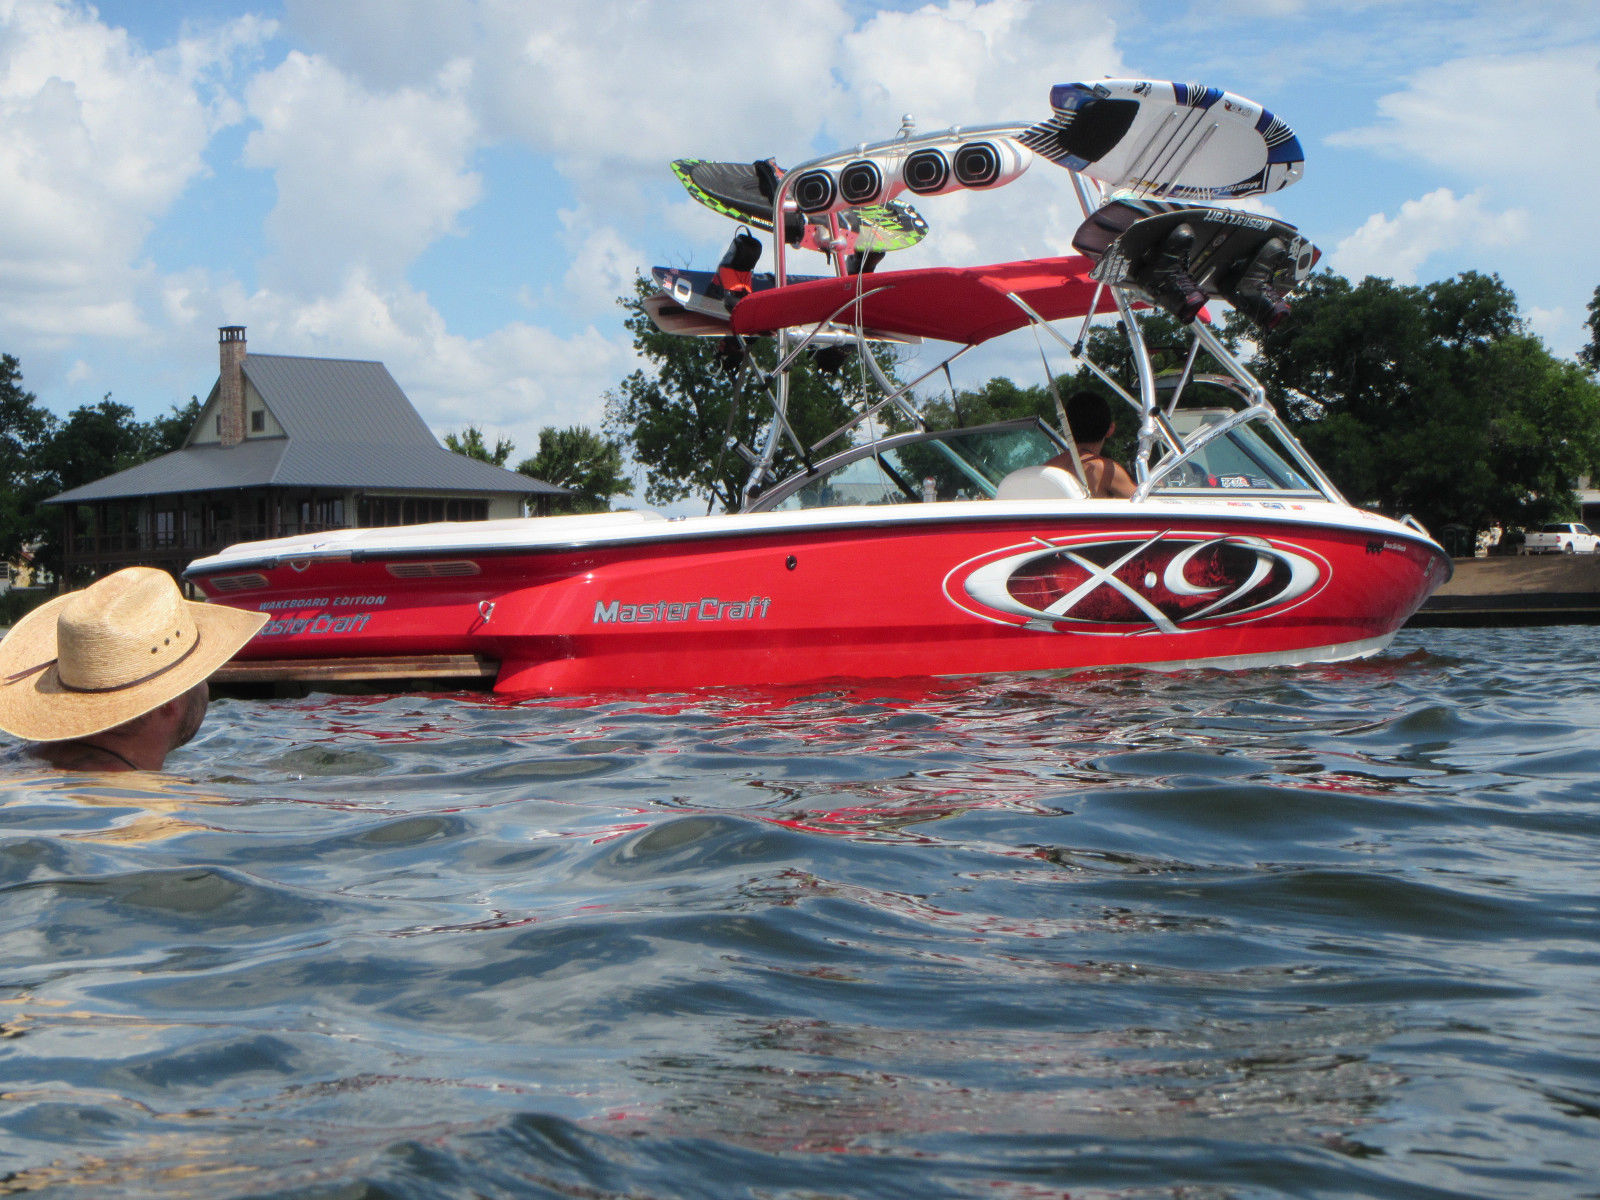 Mastercraft X9 2001 for sale for $19,000 - Boats-from-USA.com